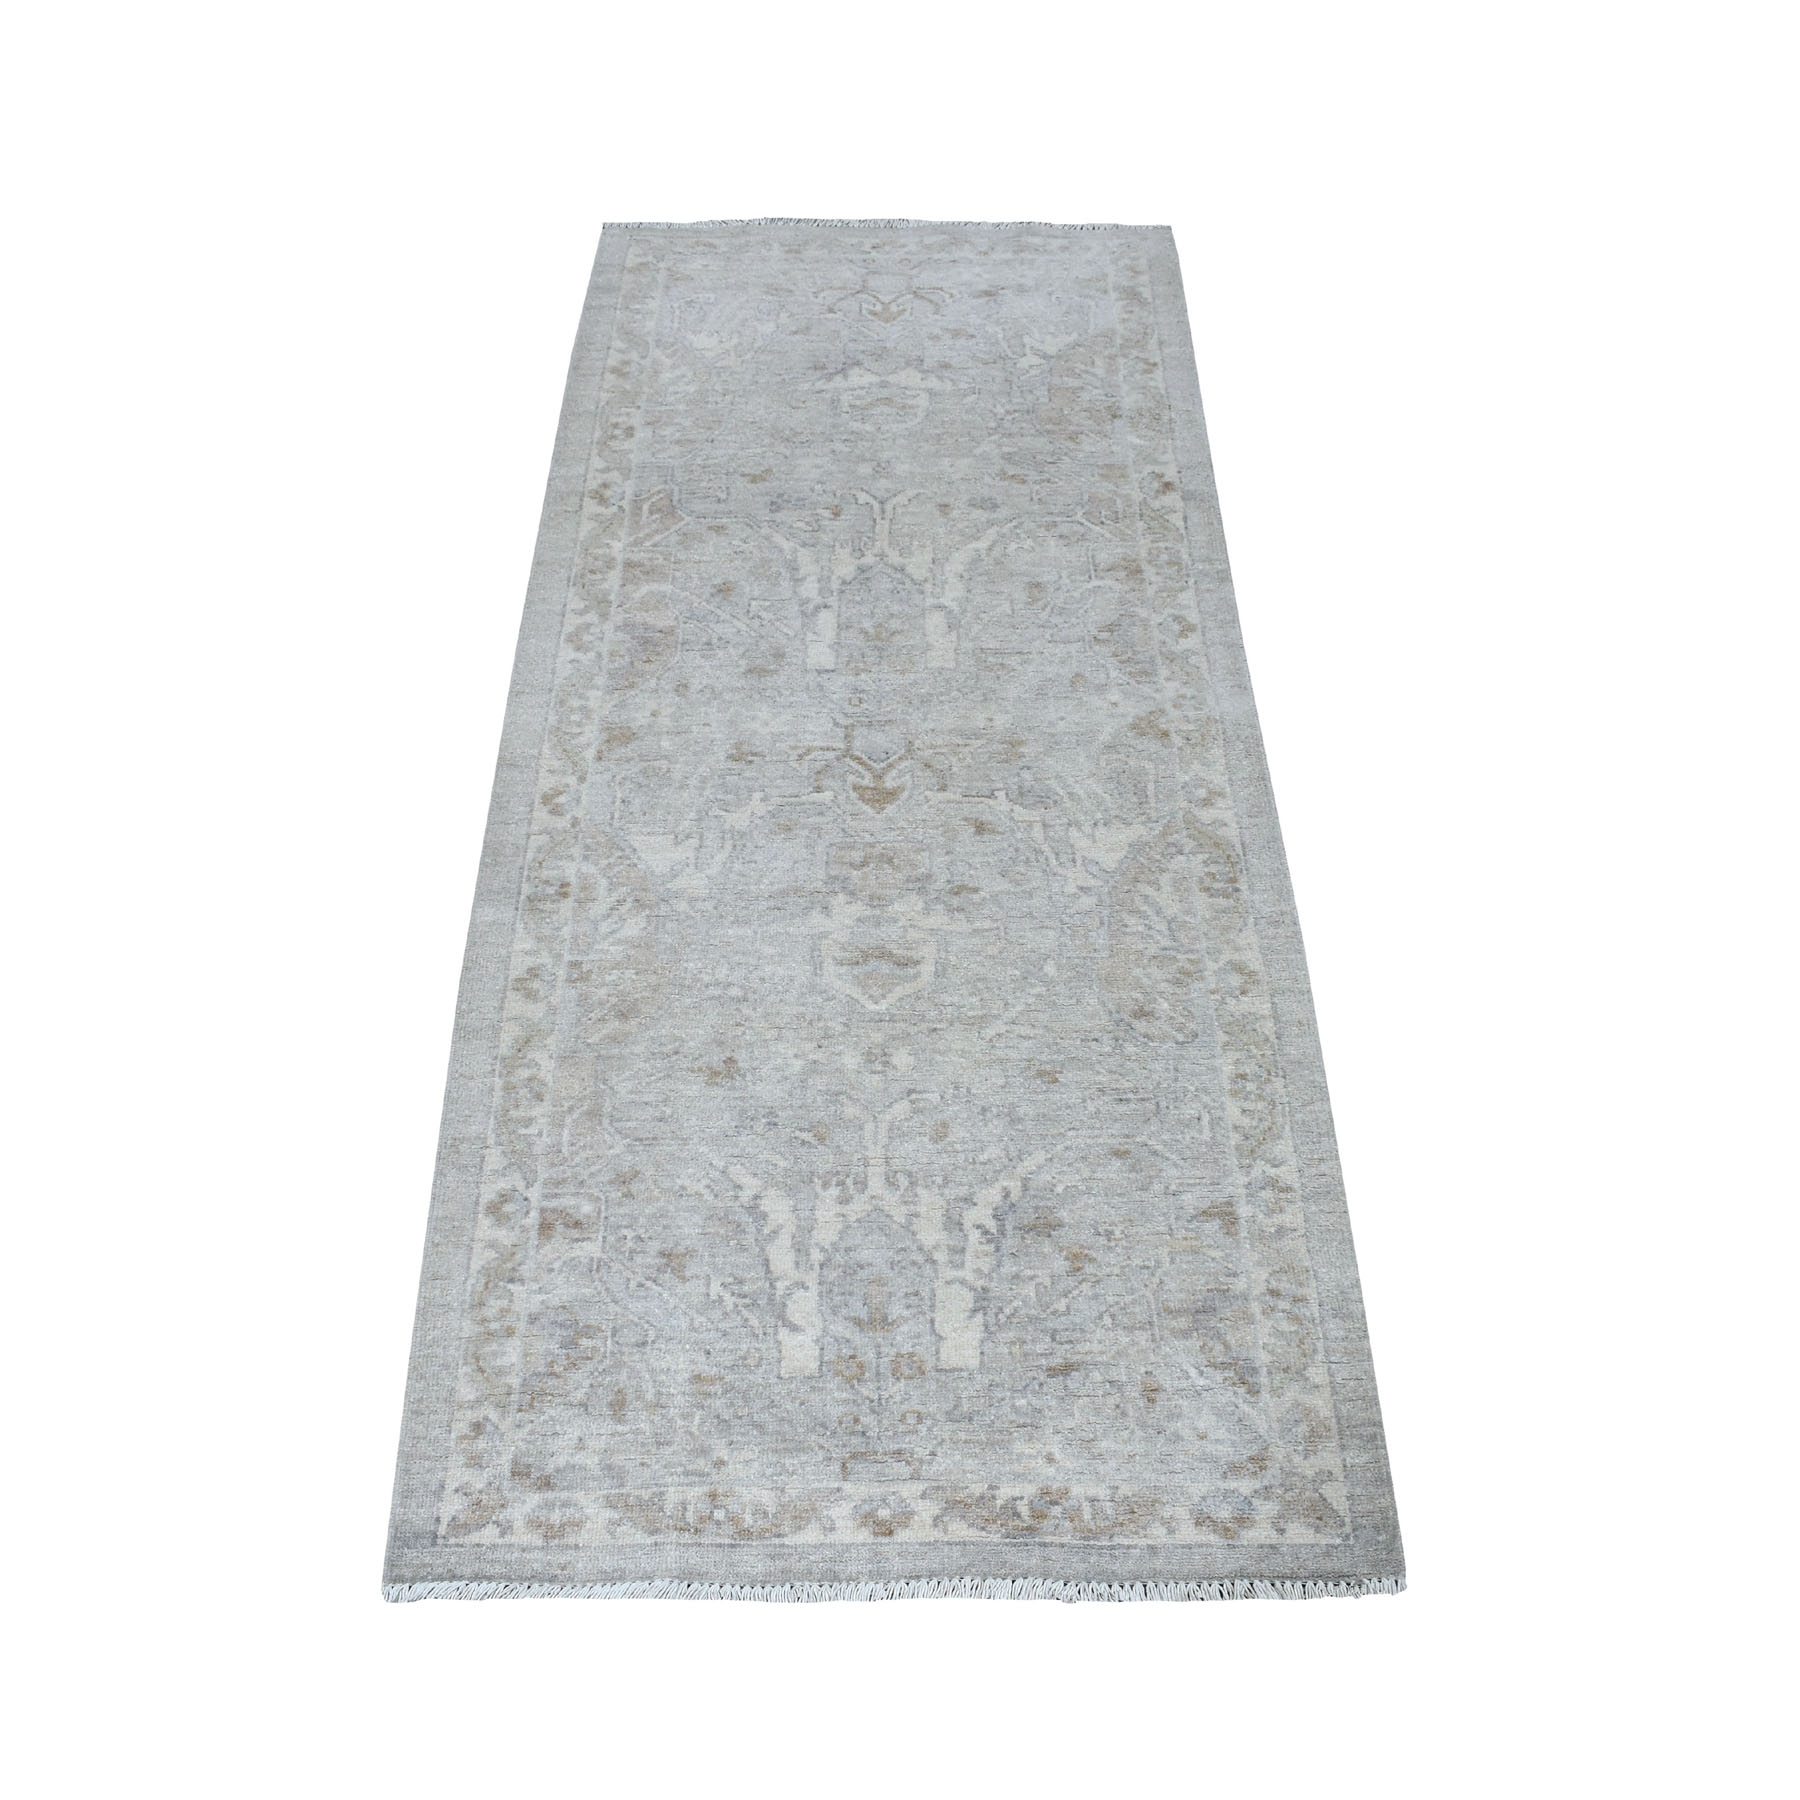 2'8"X6'2" White Wash Peshawar Pure Wool Hand Knotted Runner Orientals Rug moaec9a6